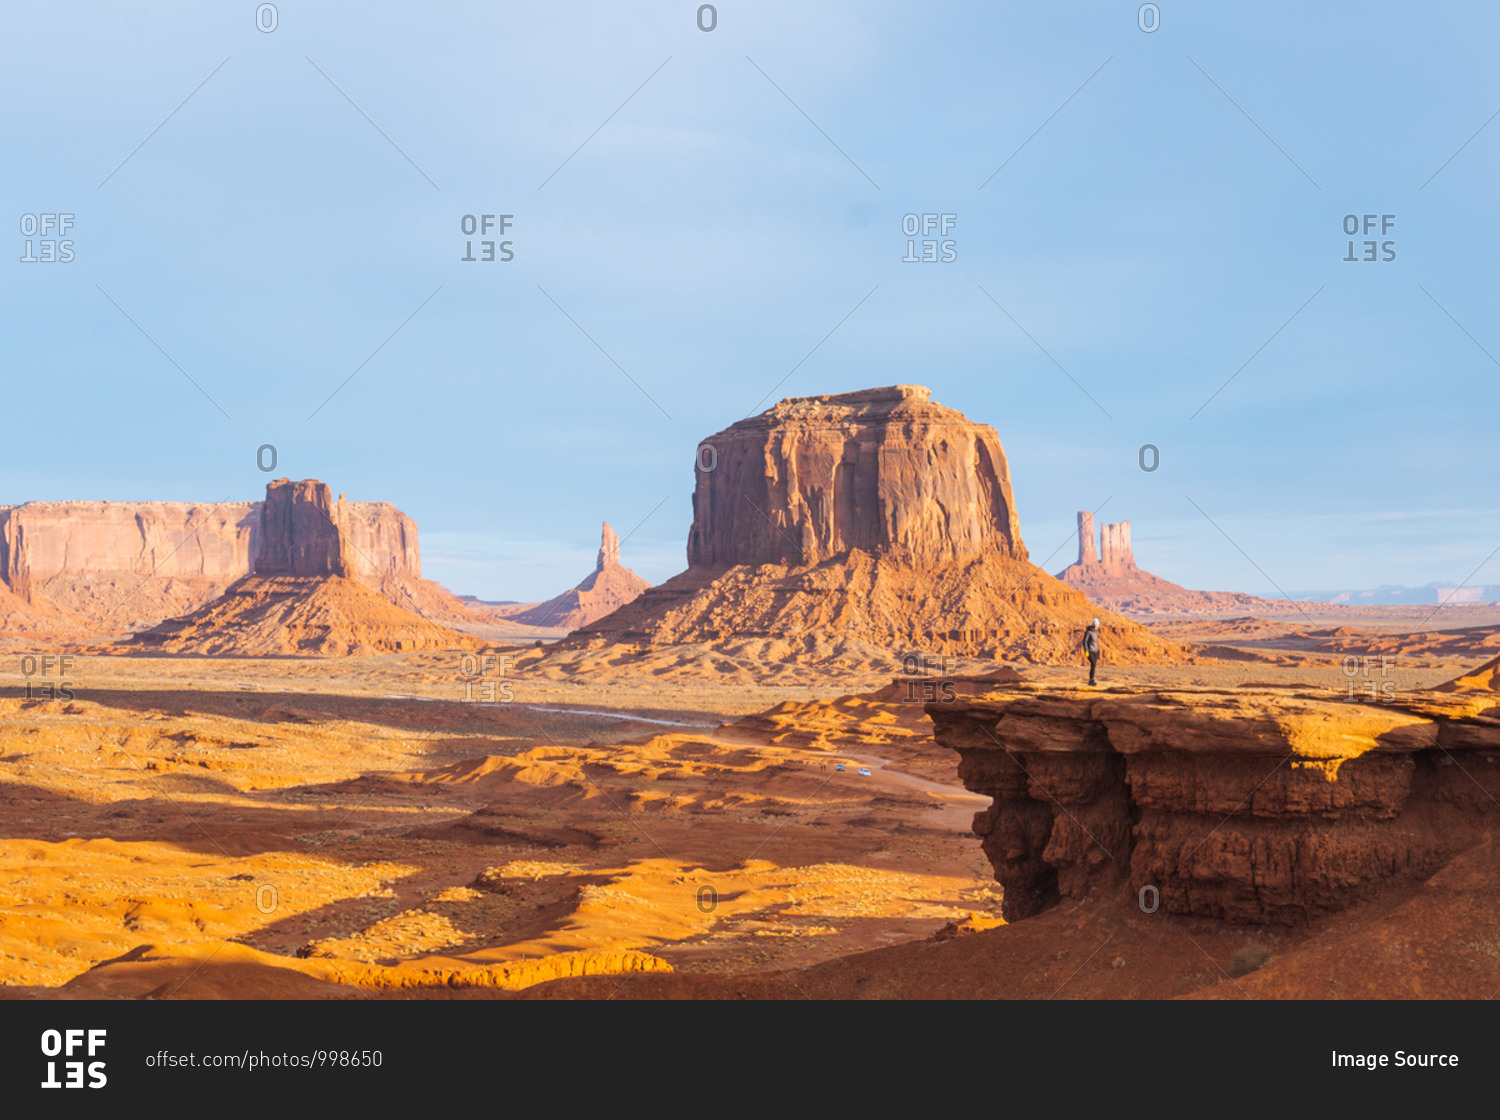 The view across buttes and sandstone formations in Monument Valley.